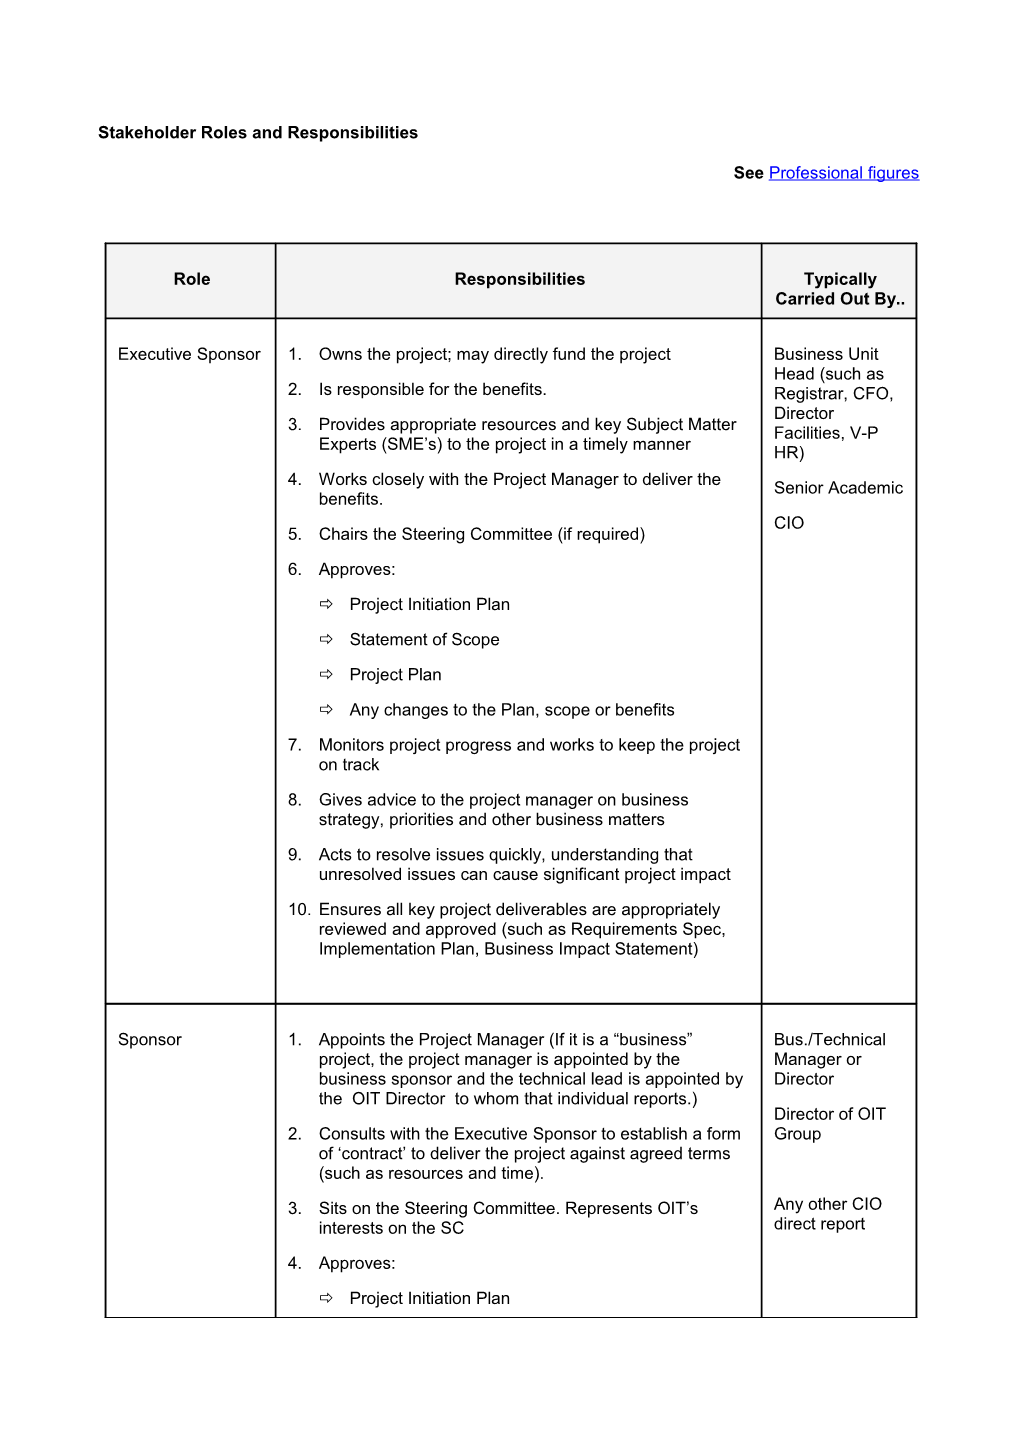 The Following Tables Briefly Describes Each of the Roles and Their Project Responsibilities